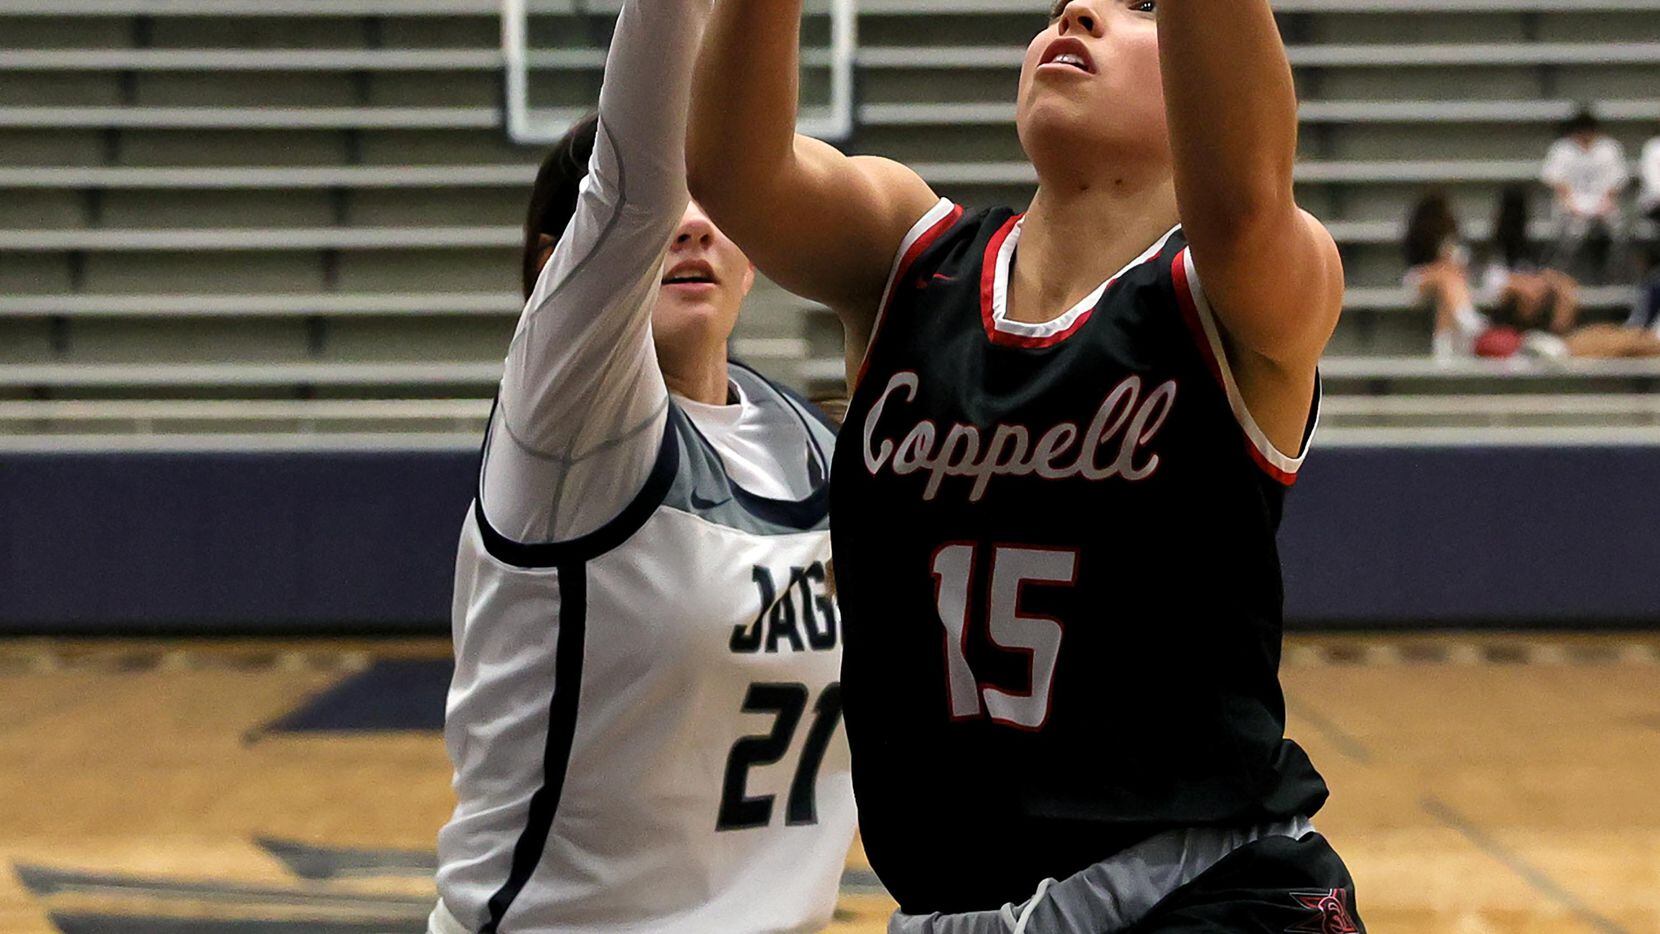 Coppell guard Atia Medenica (15) goes strong to the basket against Flower Mound guard...